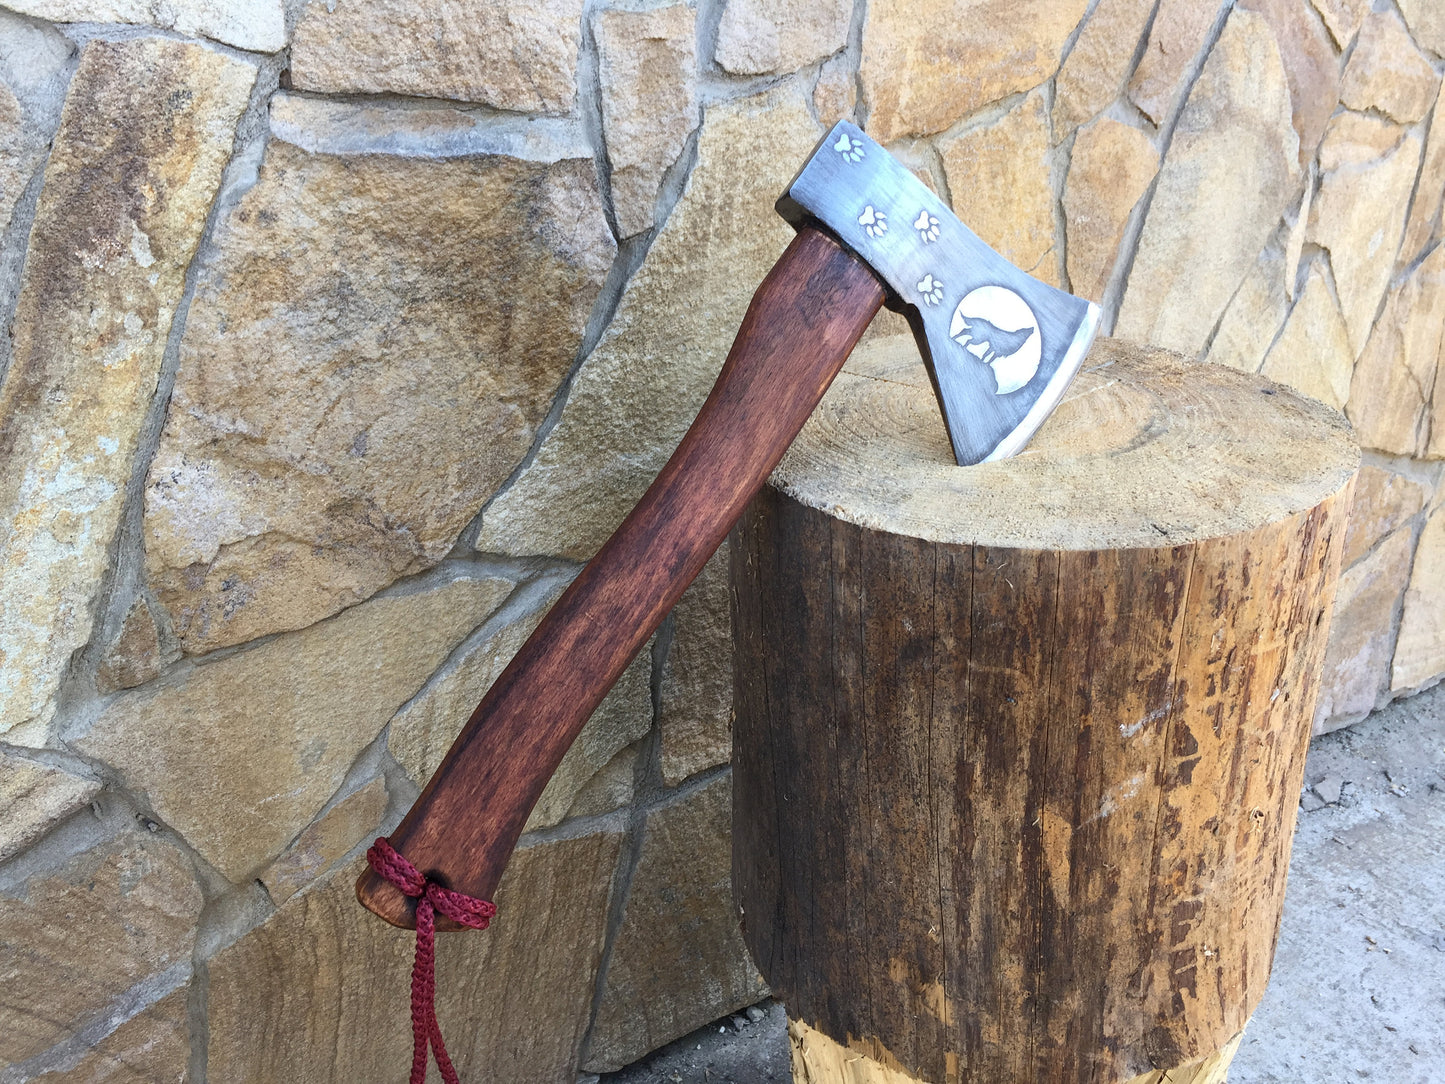 Viking axe, mens gifts, medieval axe, tomahawk, hatchet, engraved hatchet, dad birthday gift, dad gifts, gifts for dad, fathers day gift,axe